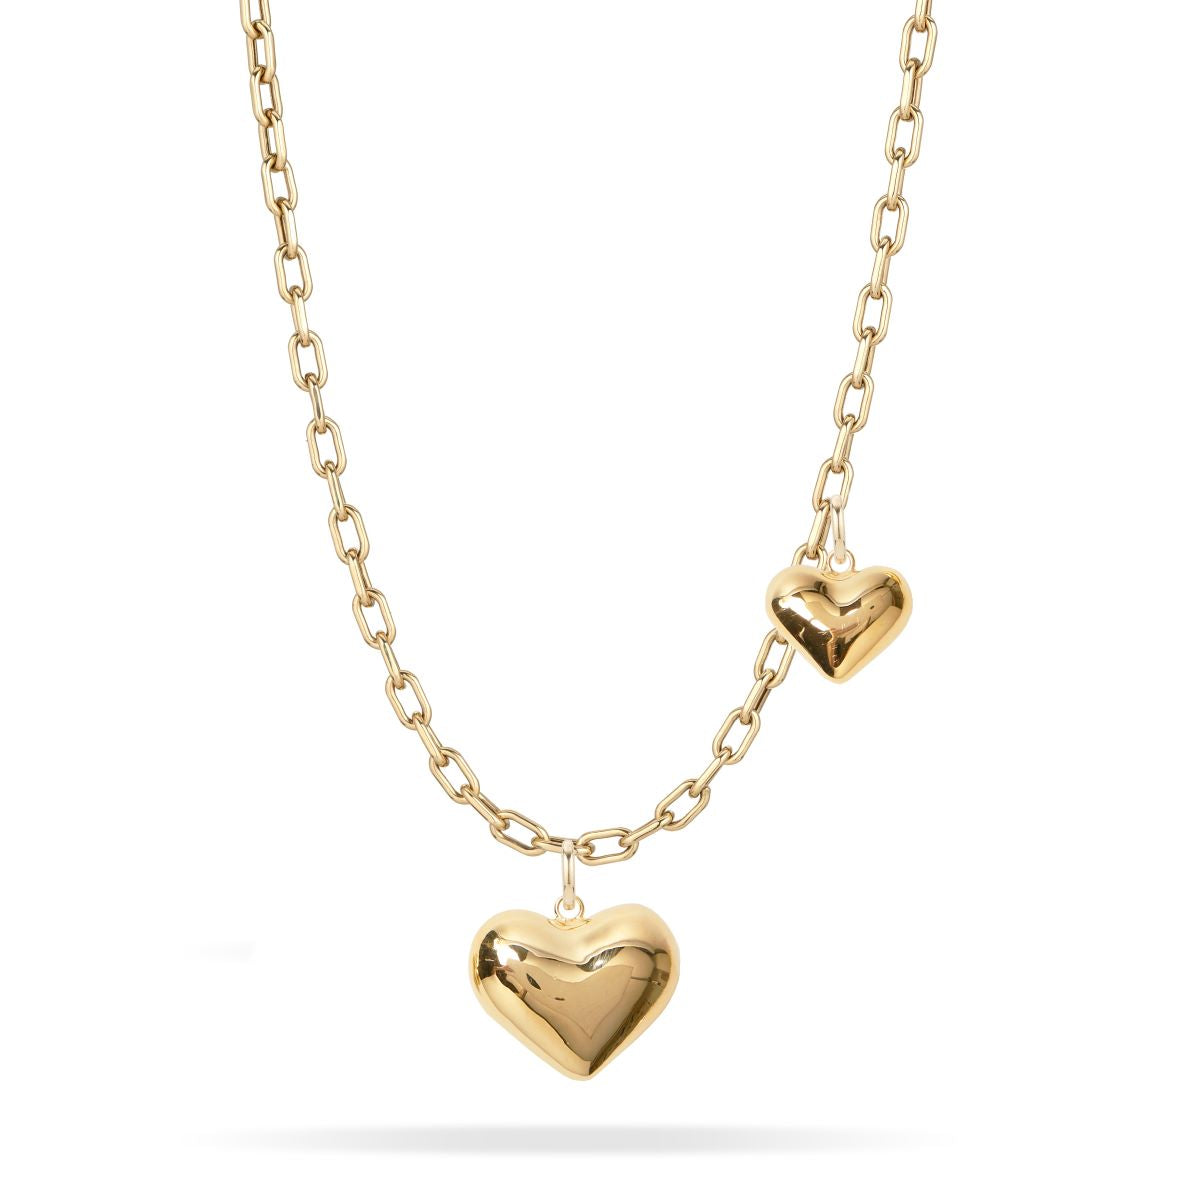 Helium Hearts Hinged Charm Necklace